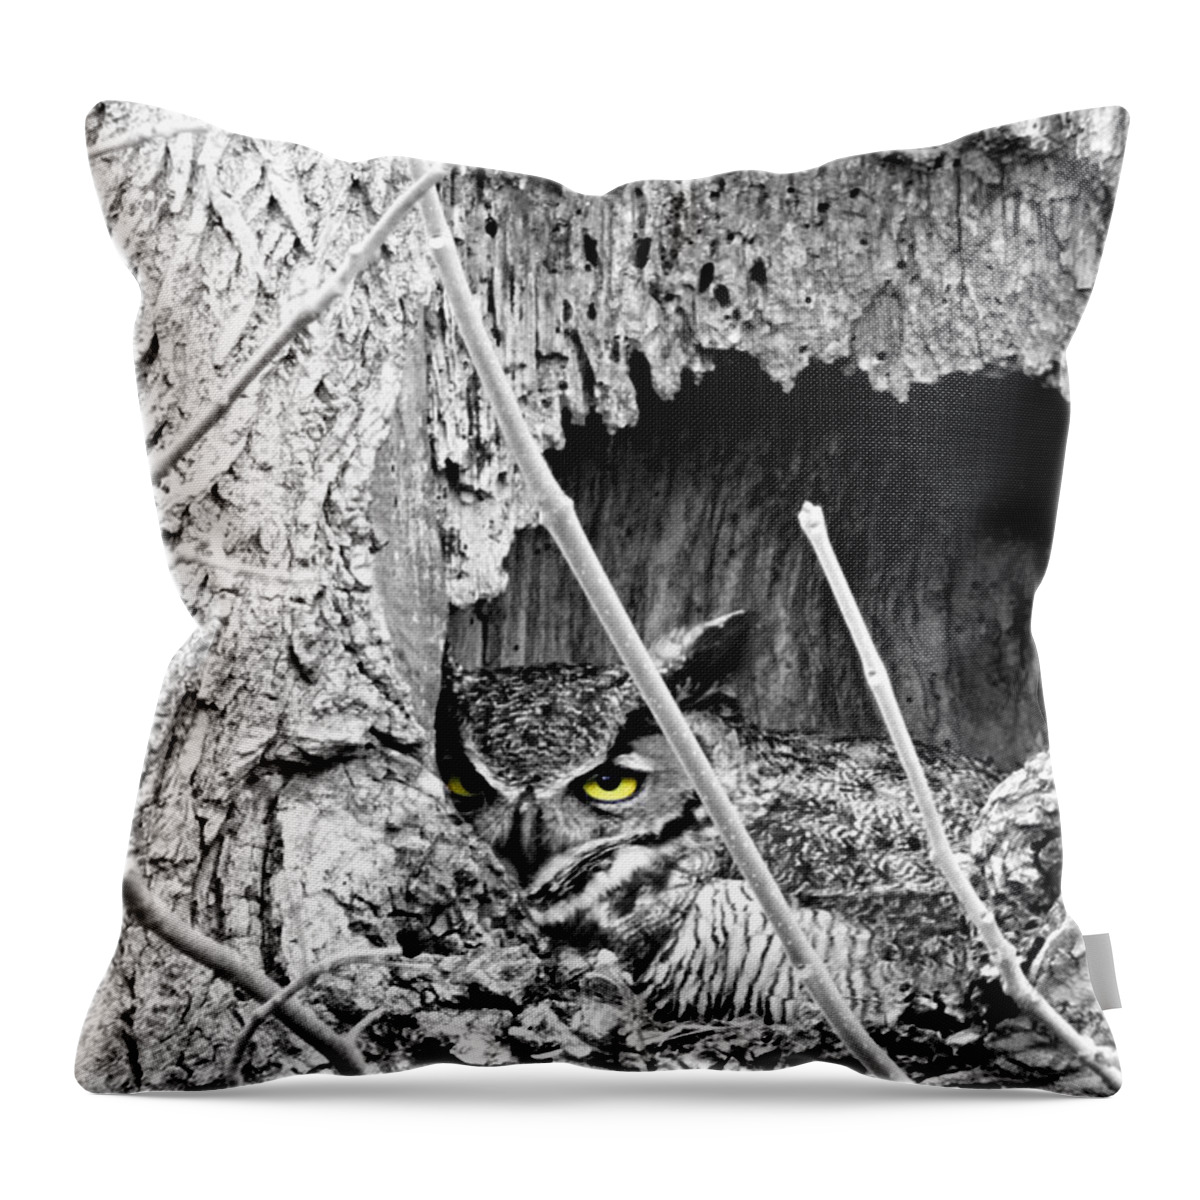 Hypnotic Throw Pillow featuring the photograph Hypnotic by Dark Whimsy